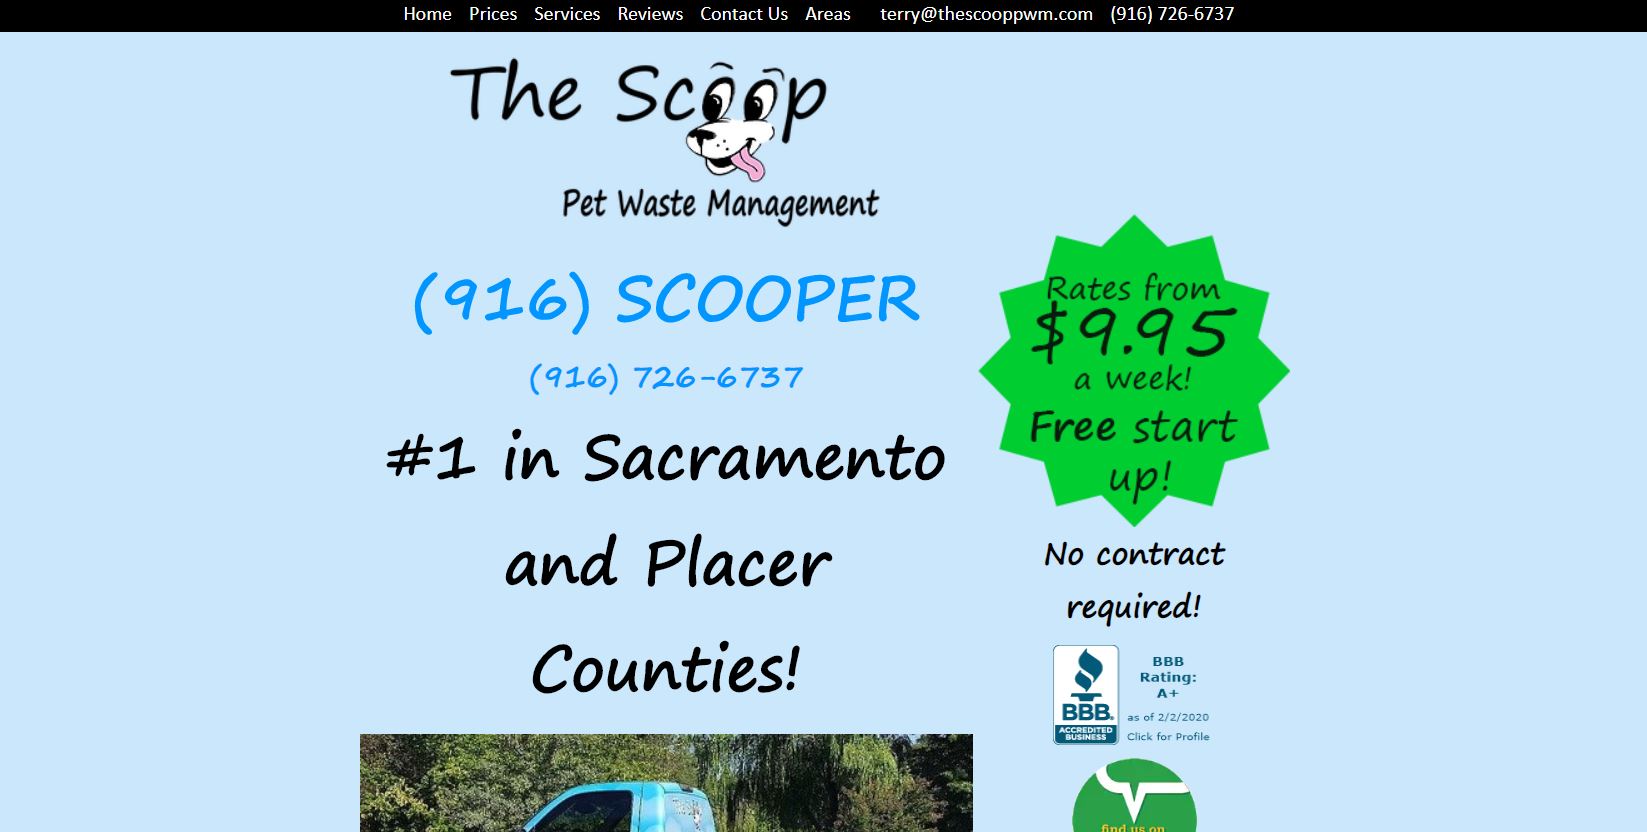 Example of work from scoop